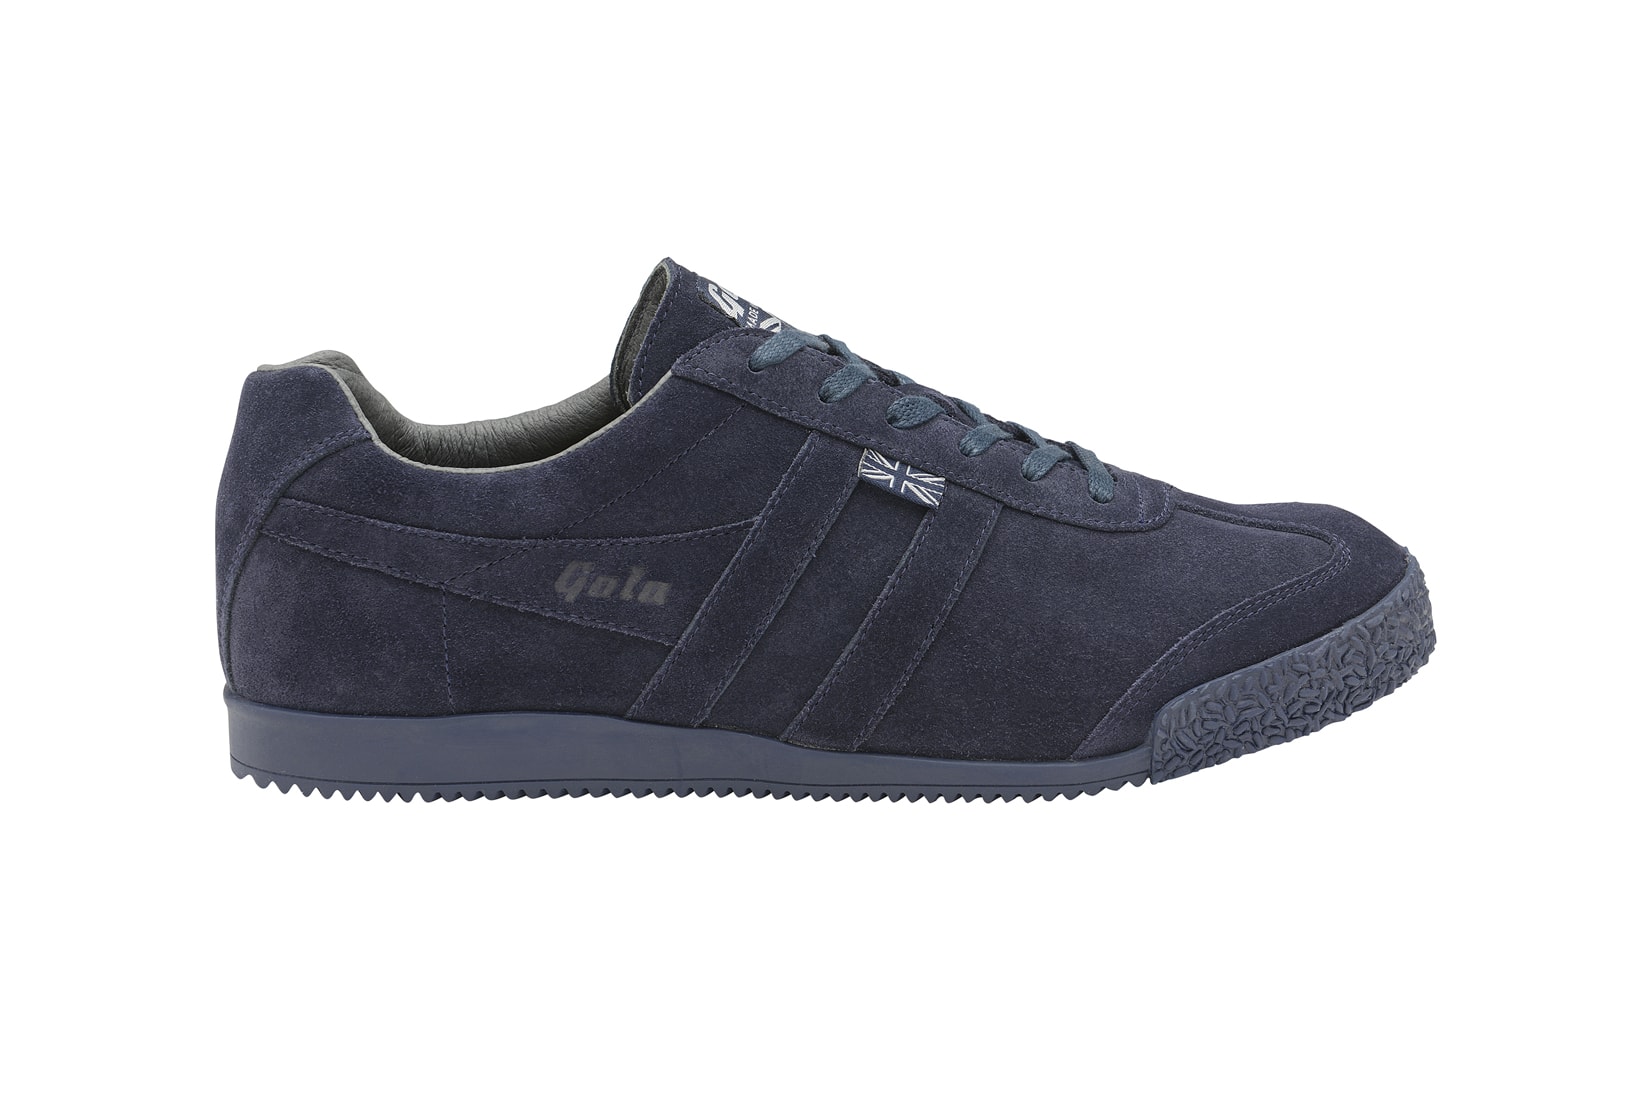 Gola Engineered Garments Collaboration Aztec Harrier Navy Grey Suede White Leather Tobacco Suede